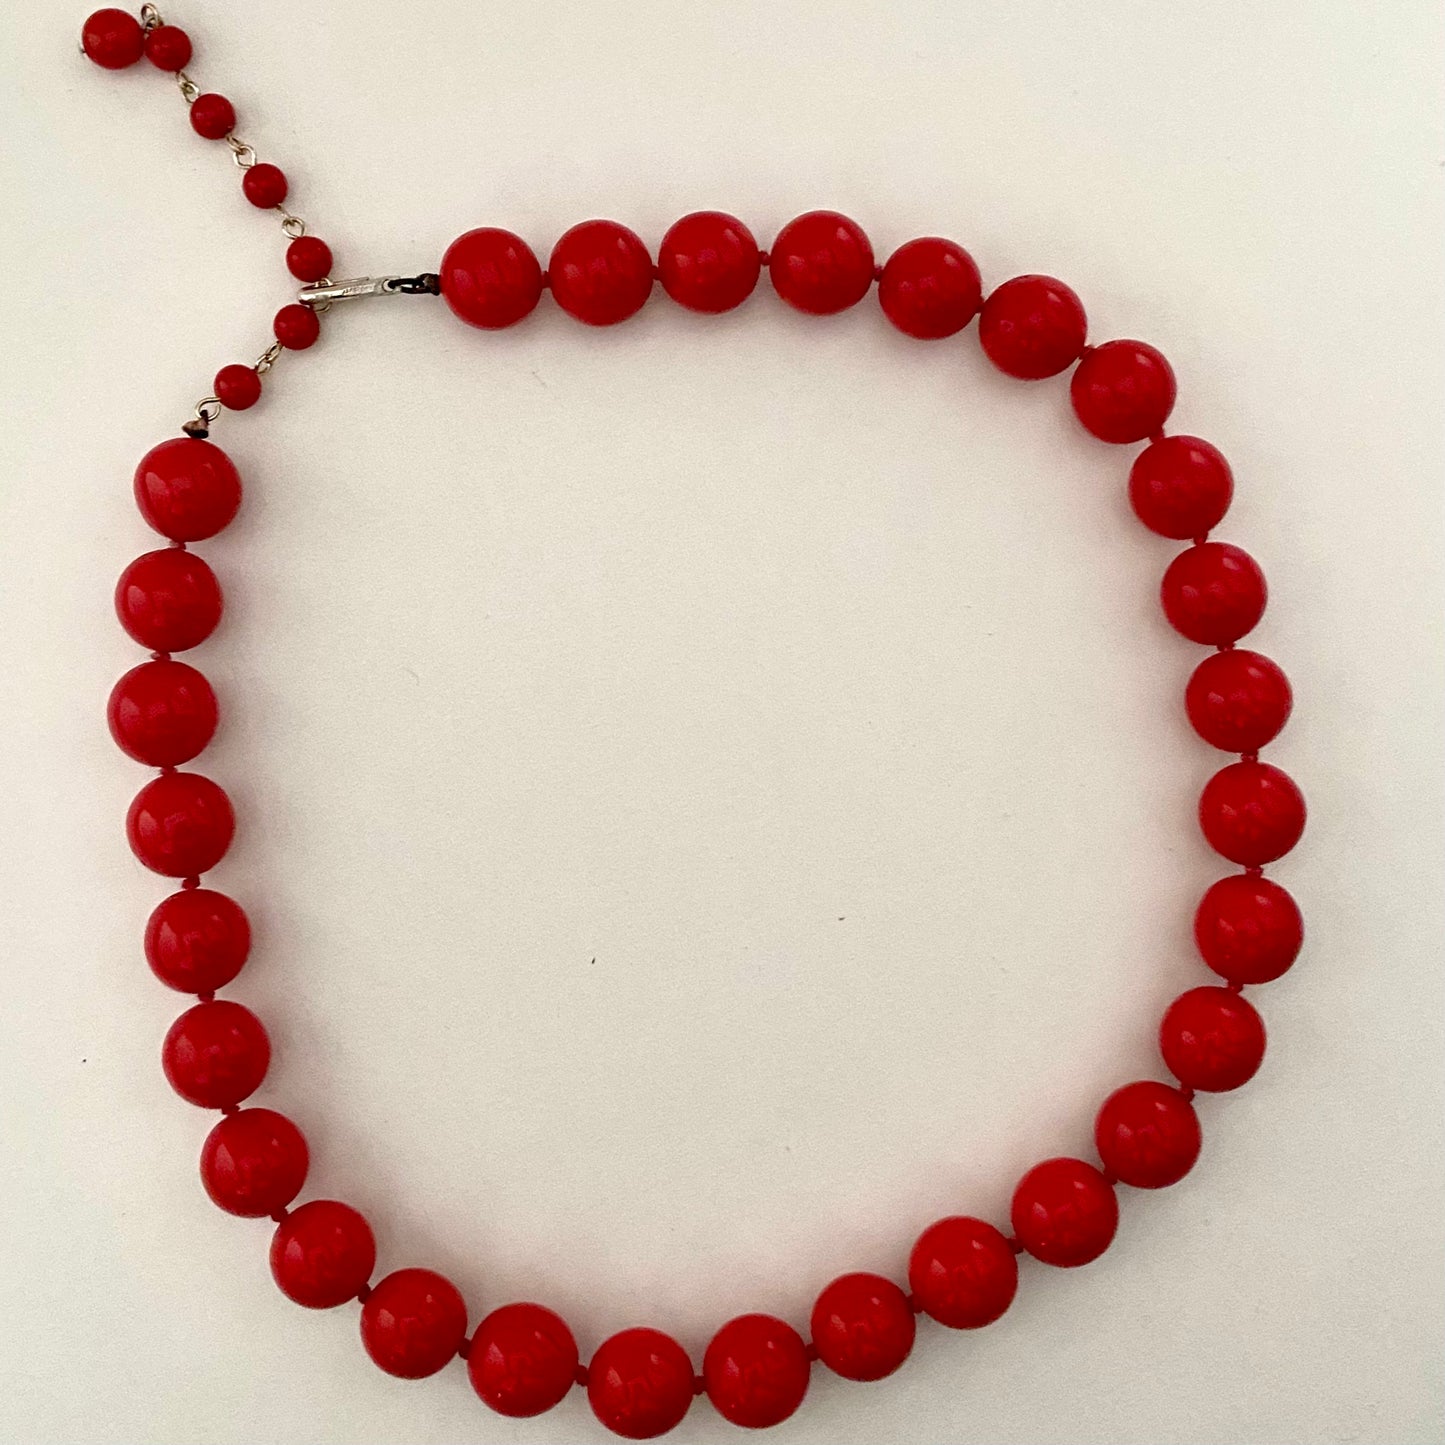 1980s Japan Red Bead Necklace & Earrings